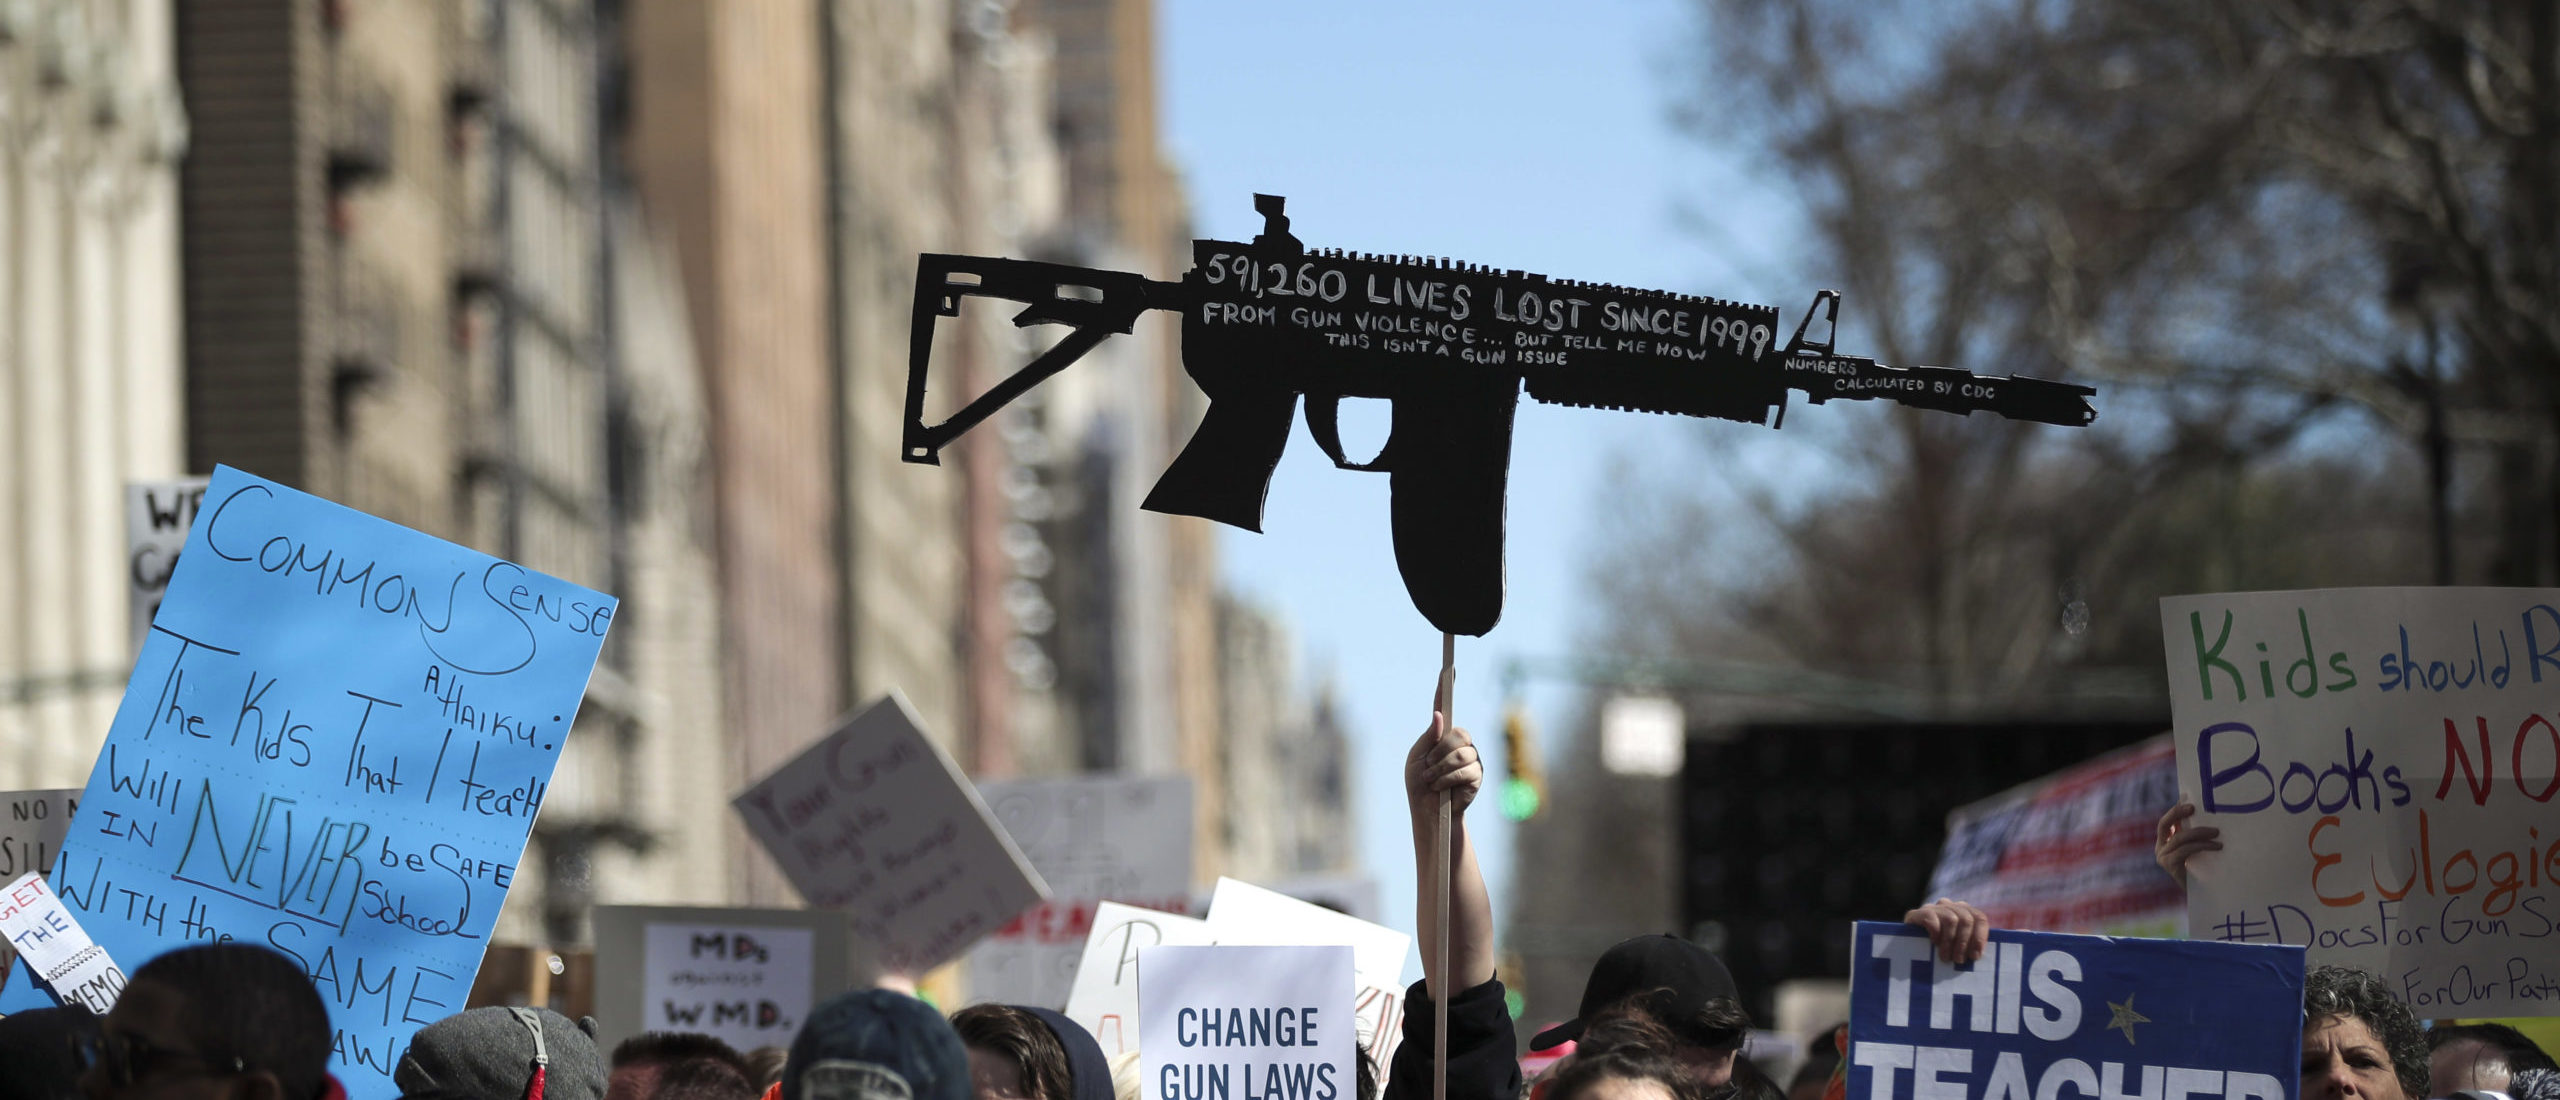 NEW YORK, NY - MARCH 24: Protestors attend the March For Our Lives just north of Columbus Circle, March 24, 2018 in New York City. (Photo by Drew Angerer/Getty Images)